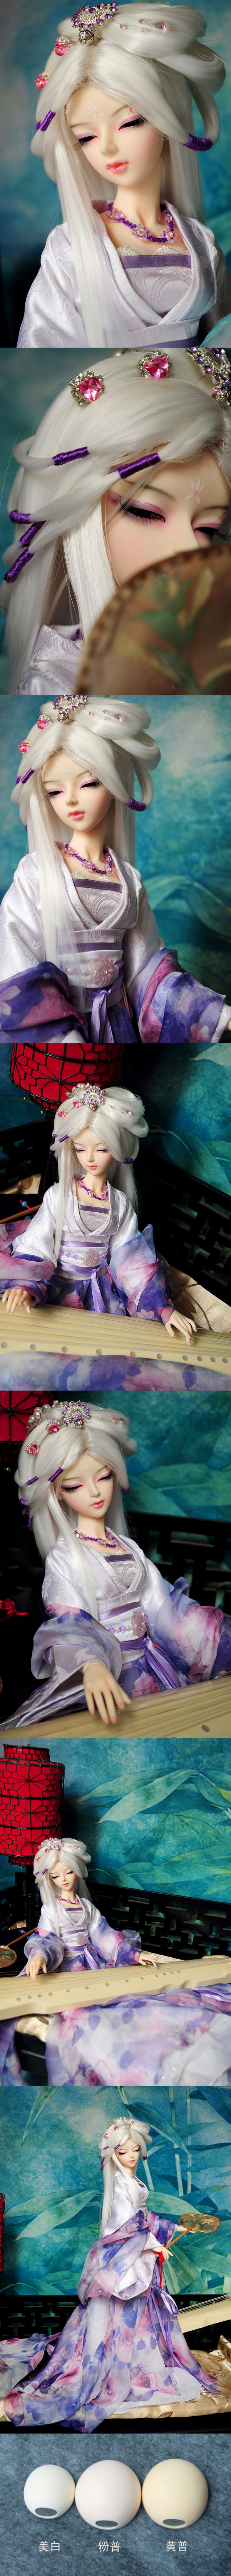 BJD Chi Yao Girl 57cm Boll-jointed doll